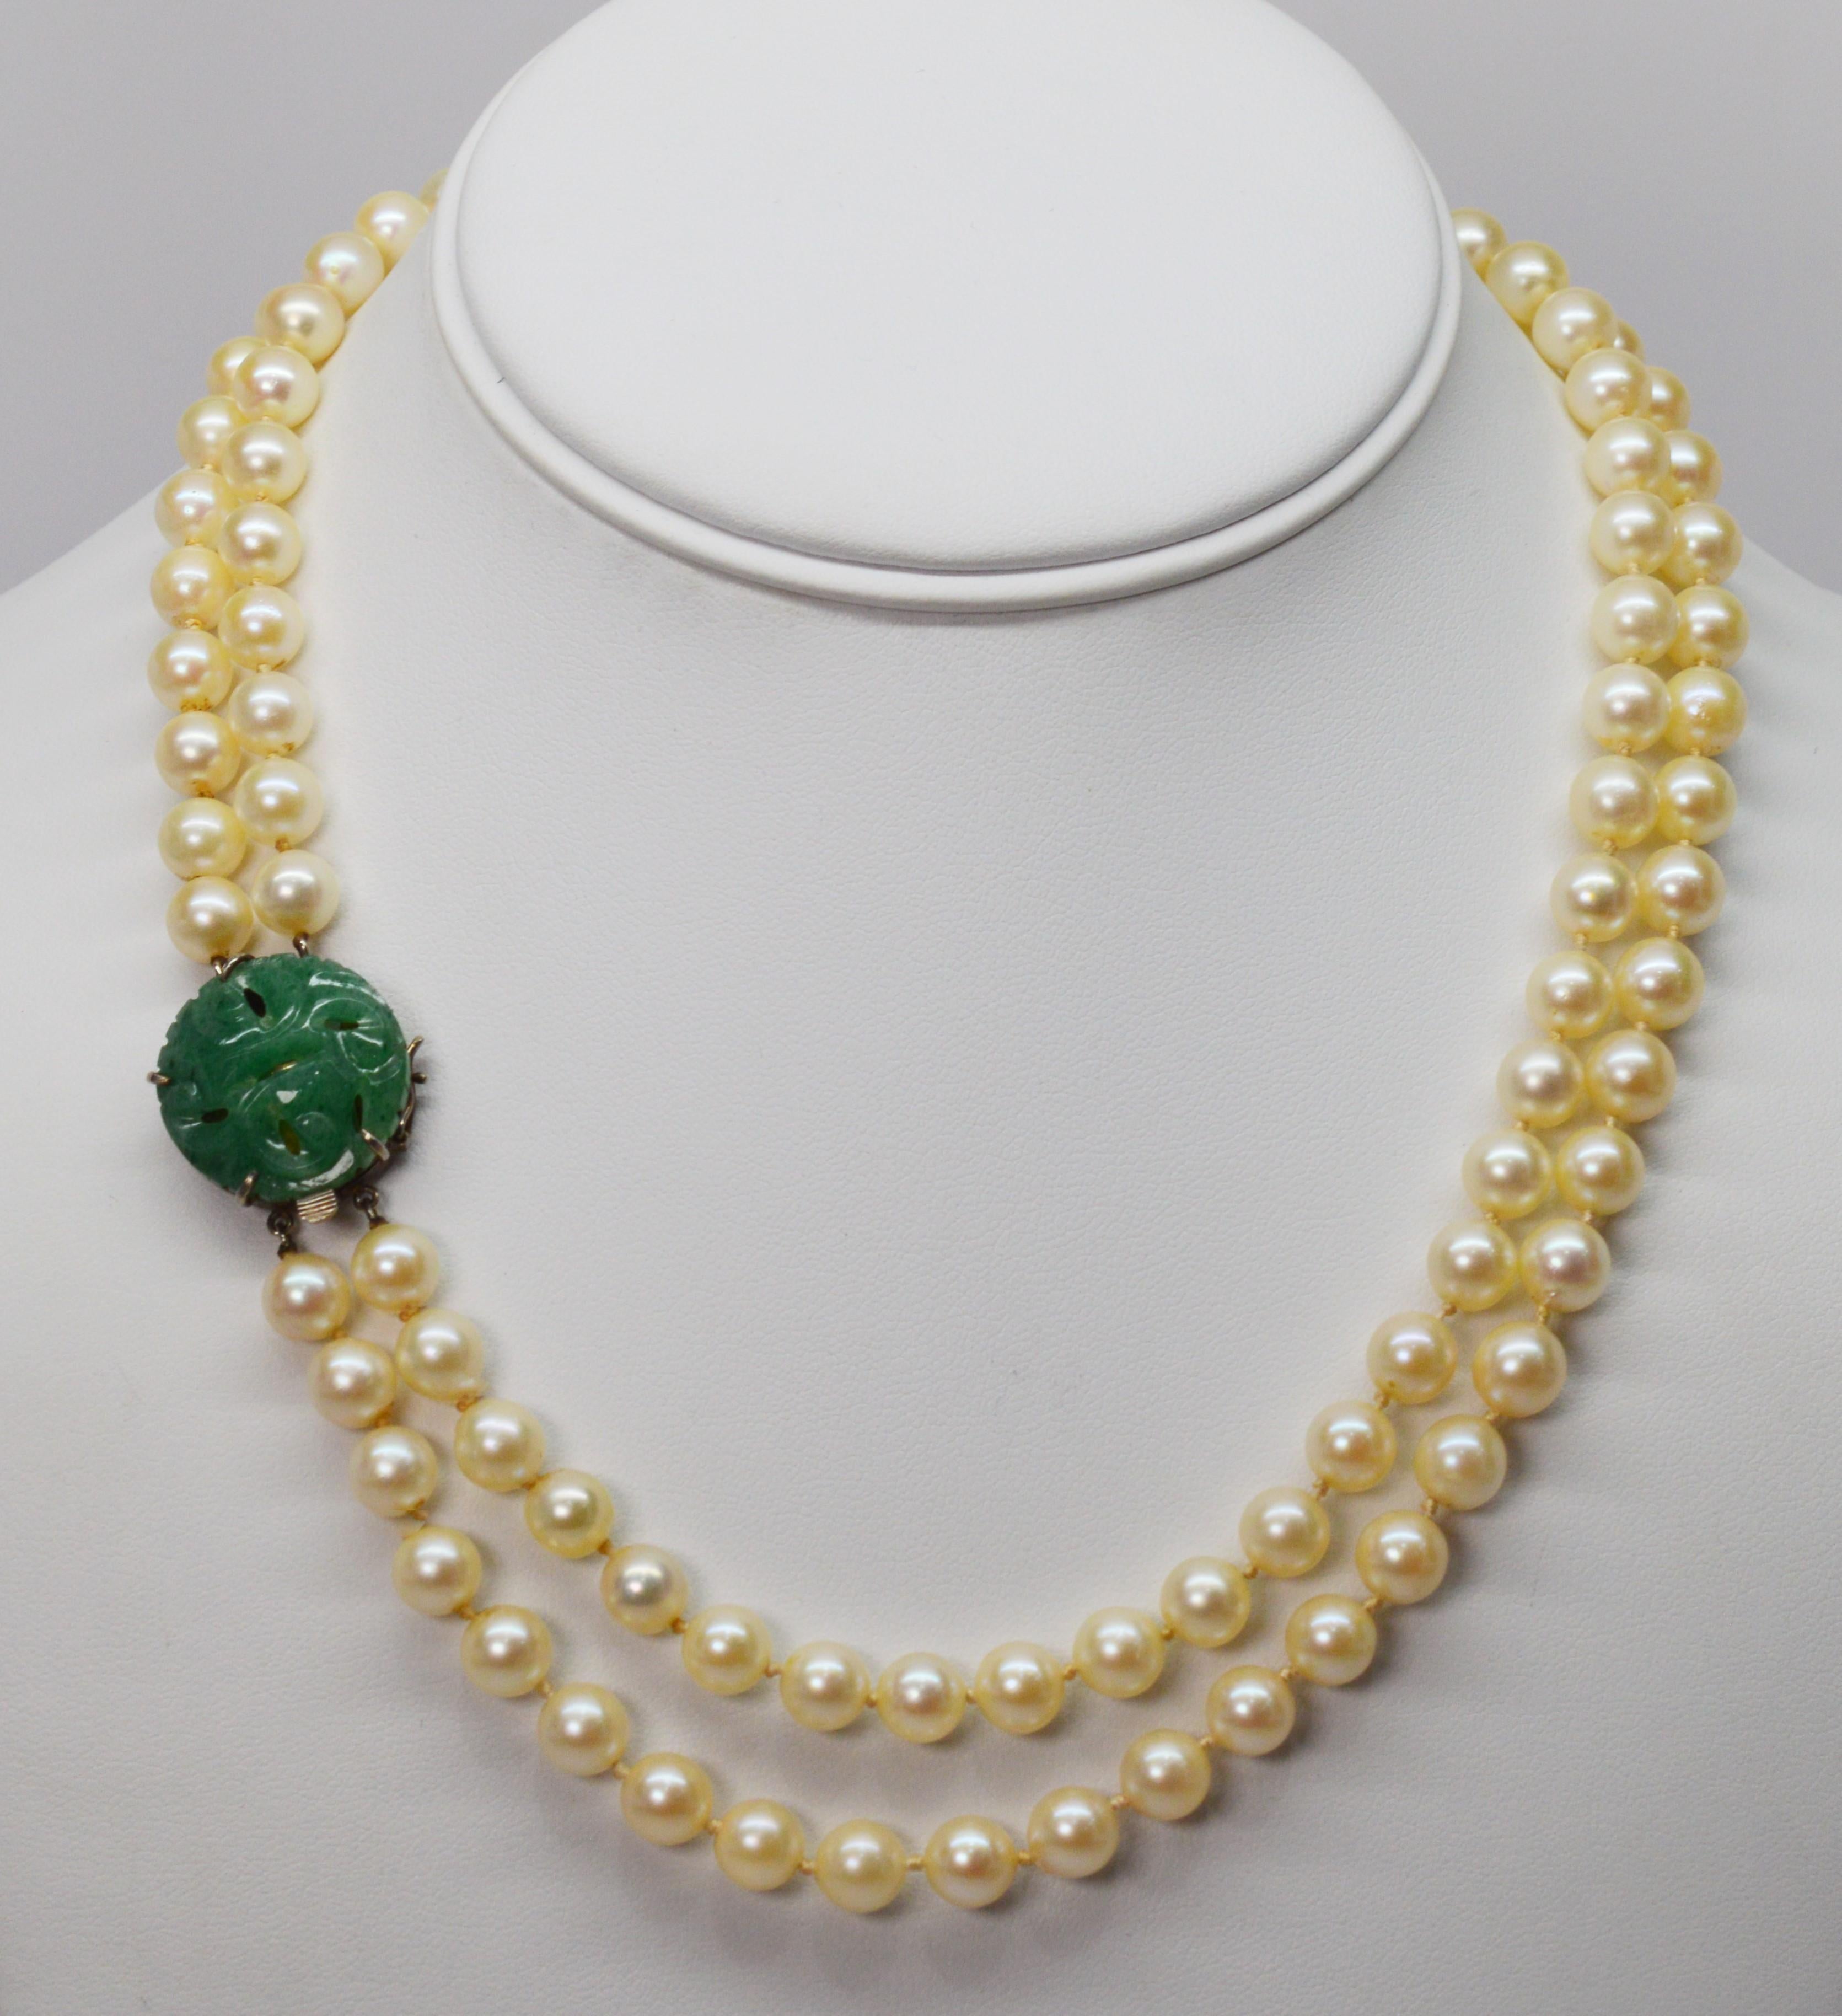 A striking hand carved jade decorative clasp mounted in silver is the focal point of this vintage double strand eighteen inch necklace of fifty 7 mm hand strung pearls. The ornate jade box clasp with safety clip measures approximately 3/4 inch round